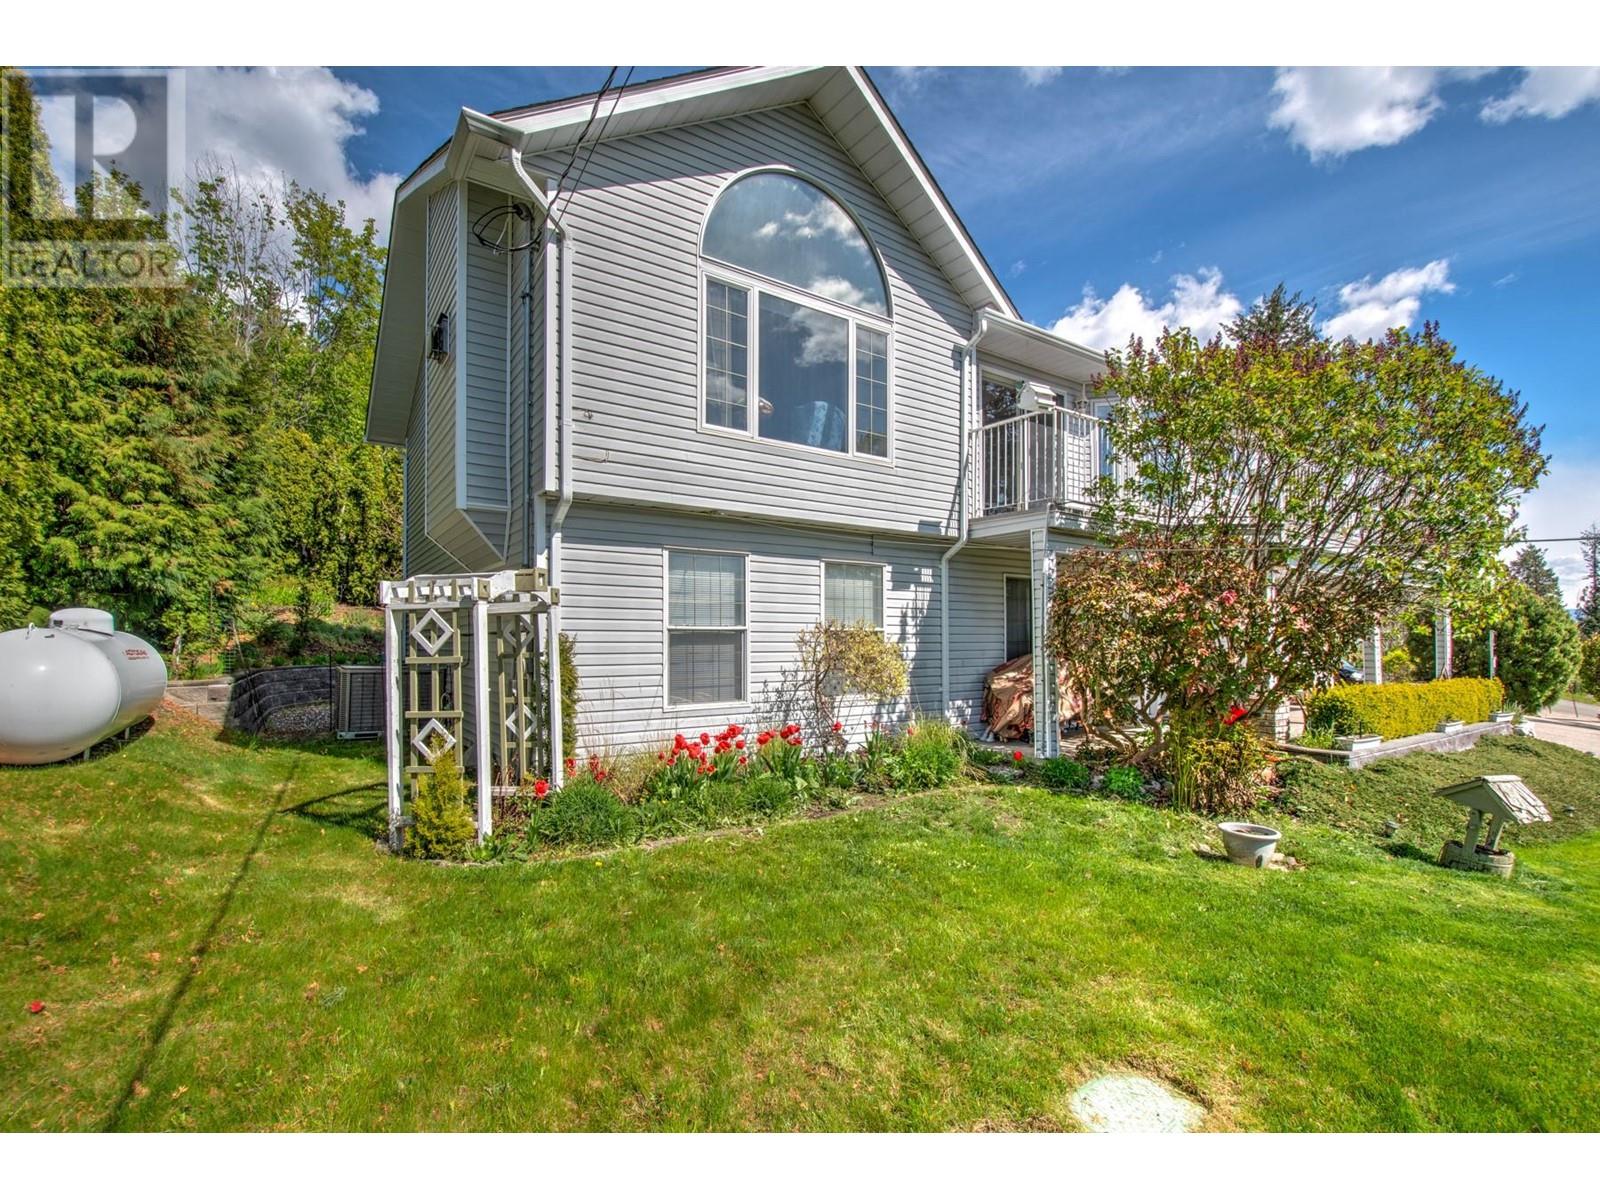  430 Galway Place, Vernon